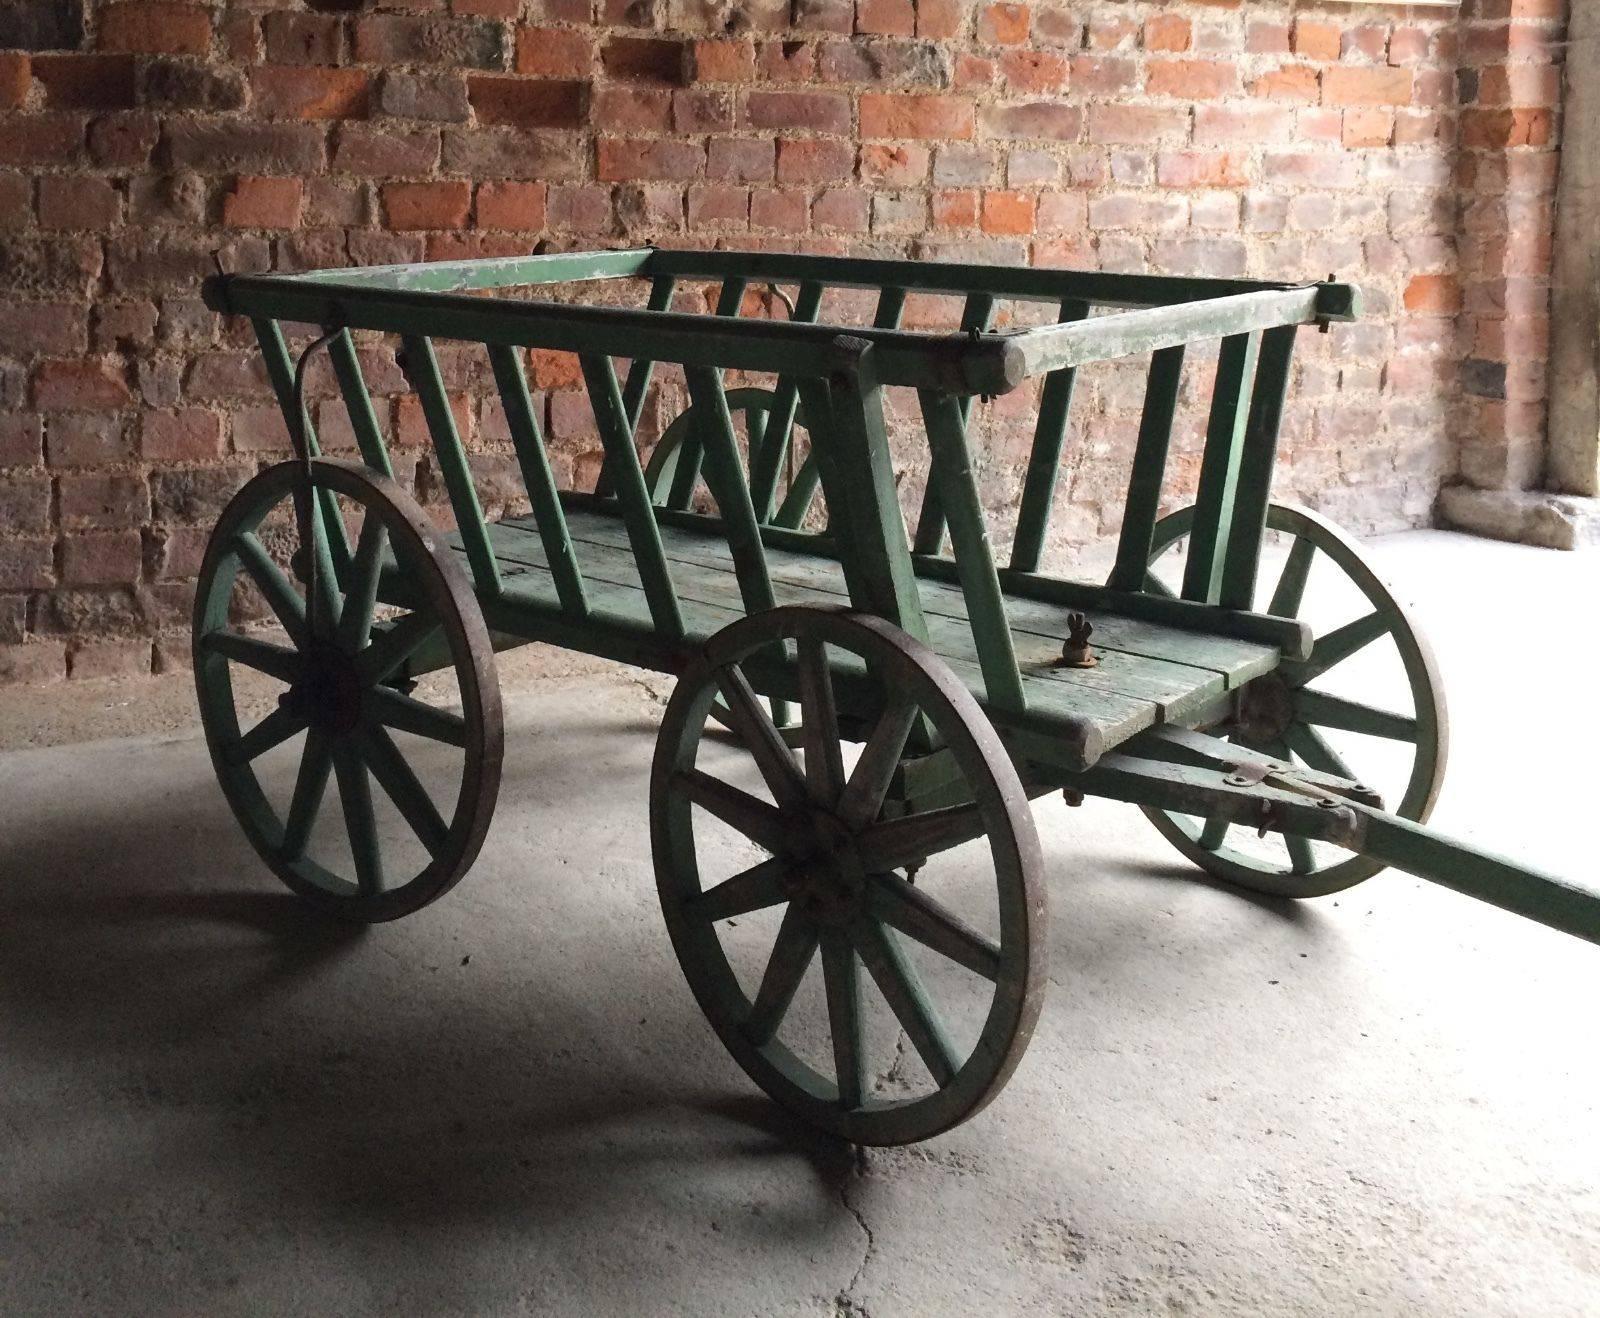 A beautiful and original 19th century French rustic dog cart or hand cart, circa 1870, the cart is offered in excellent original weathered and aged condition, the body made from oak with each wheel banded in iron, painted in original French